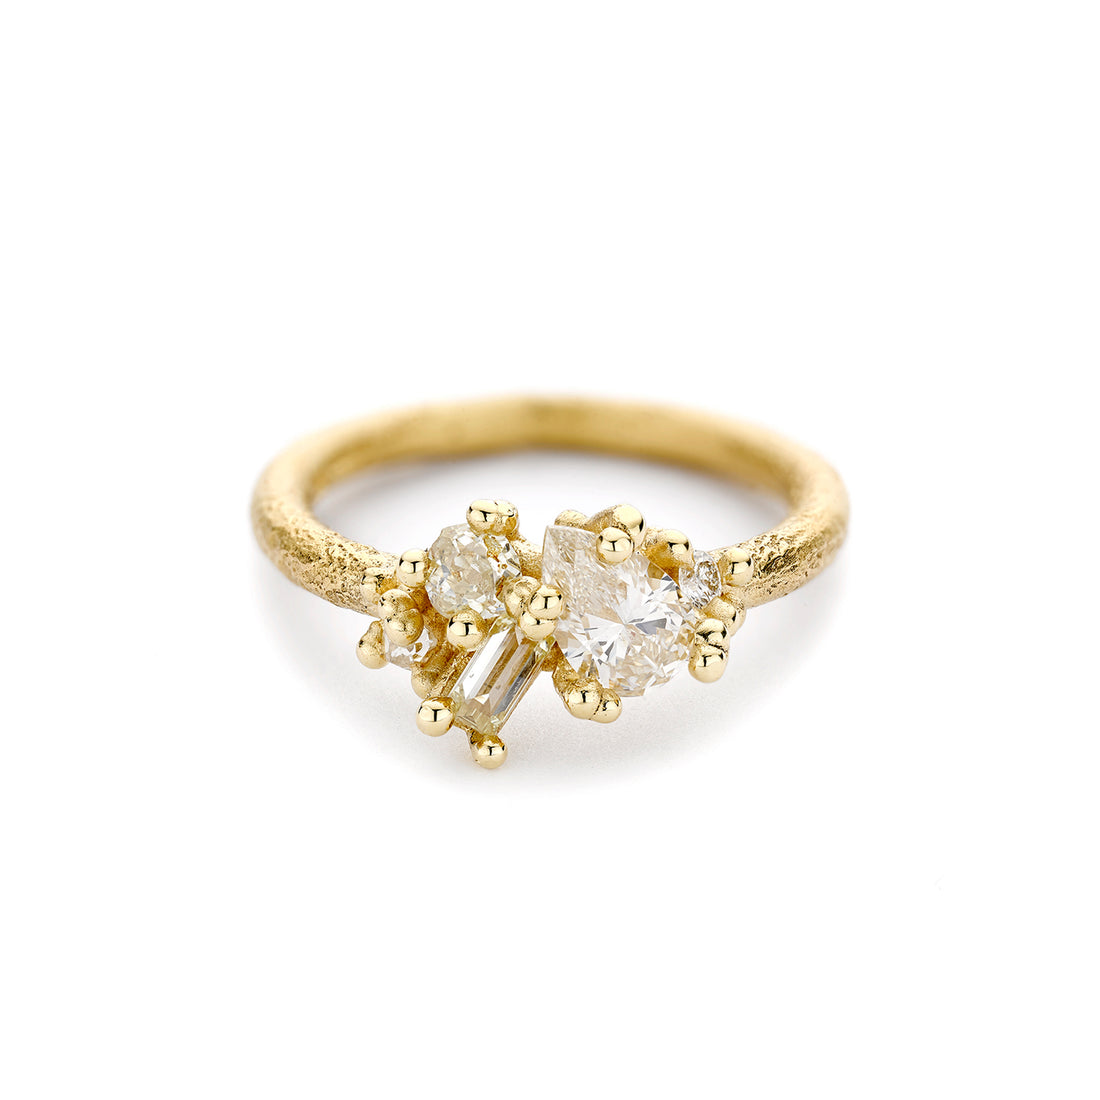  Contrast Cut Diamond Cluster Ring by Ruth Tomlinson | The Cut London